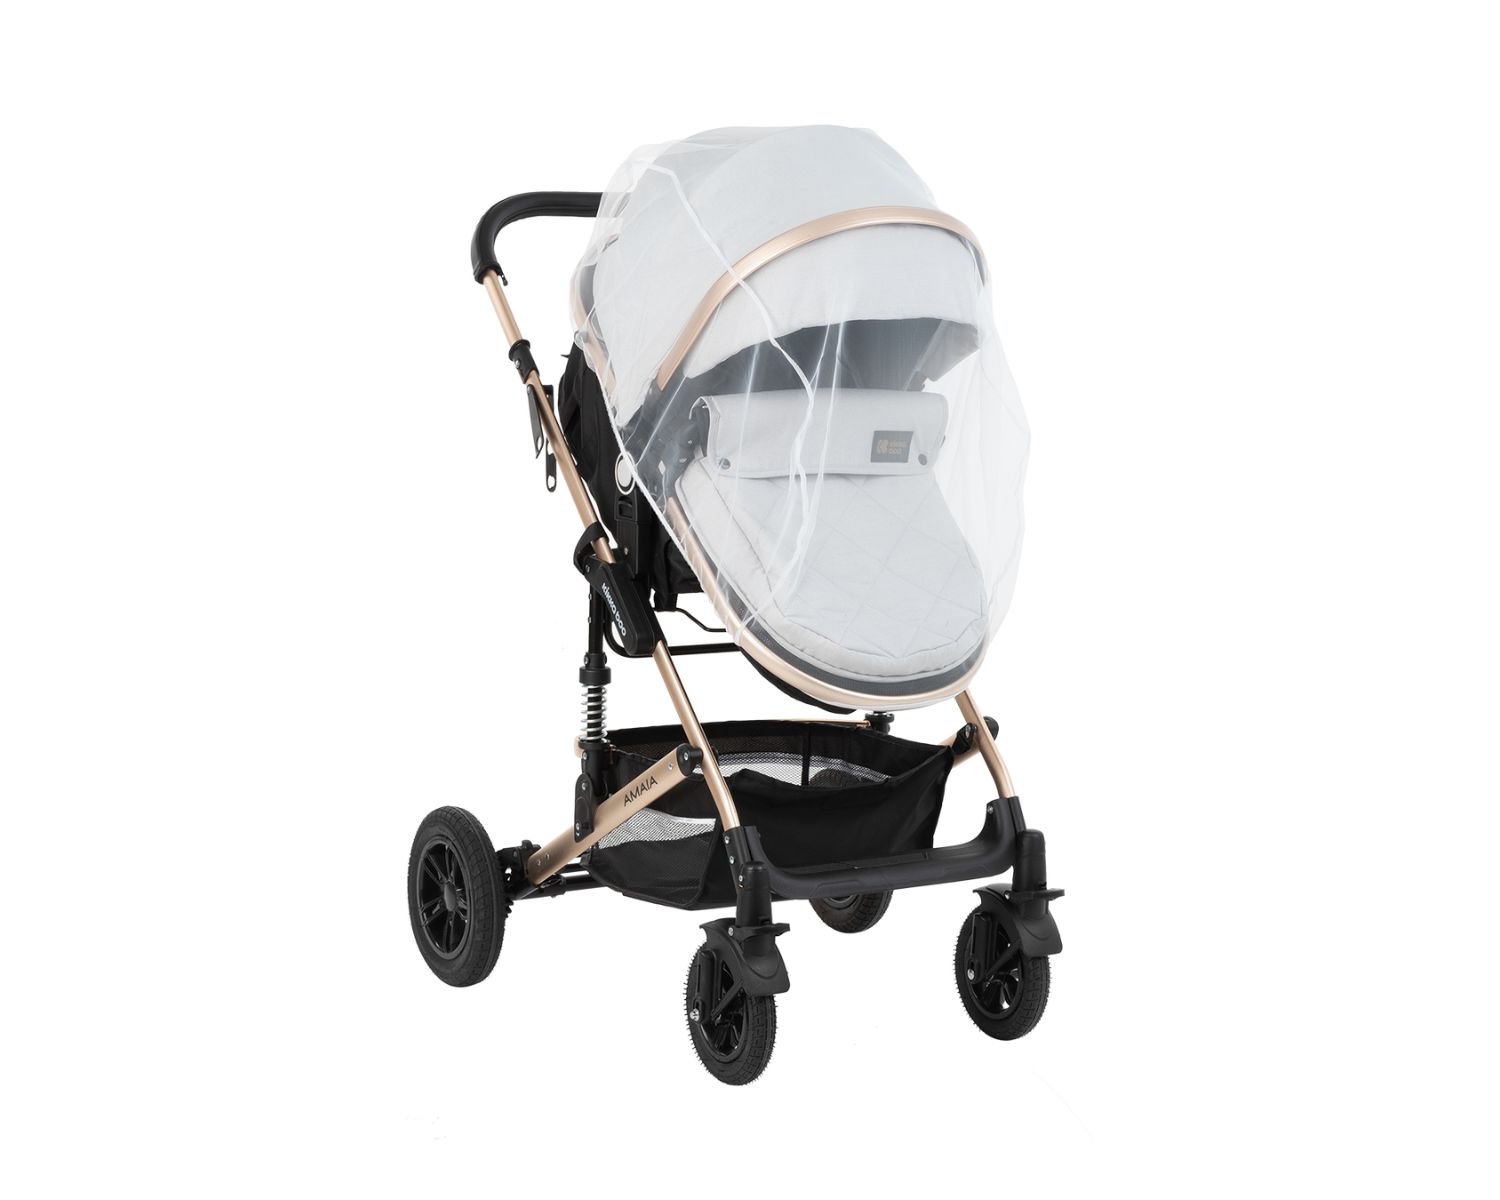 Stroller Mosquito Net Review: Protect Your Baby from Insects